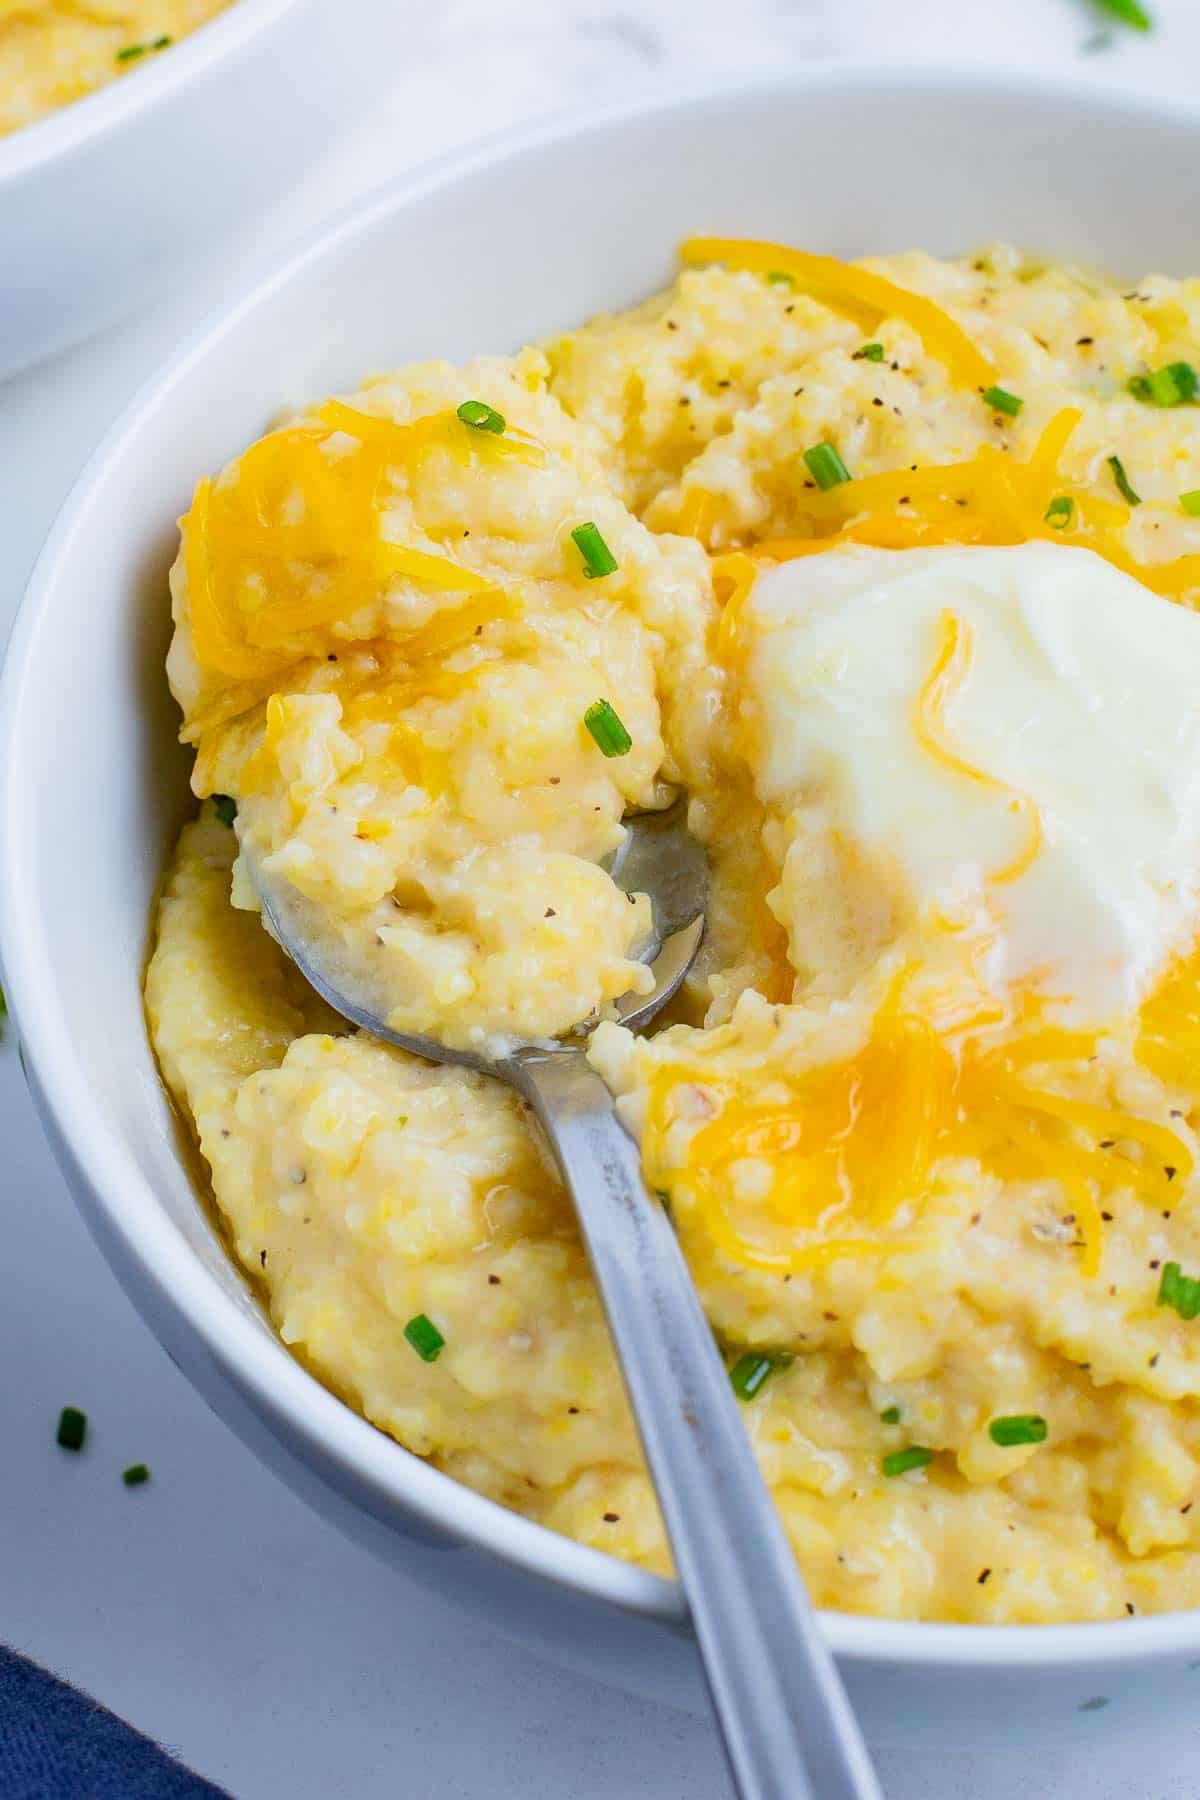 Cheesy grits in a white bowl with a spoon.